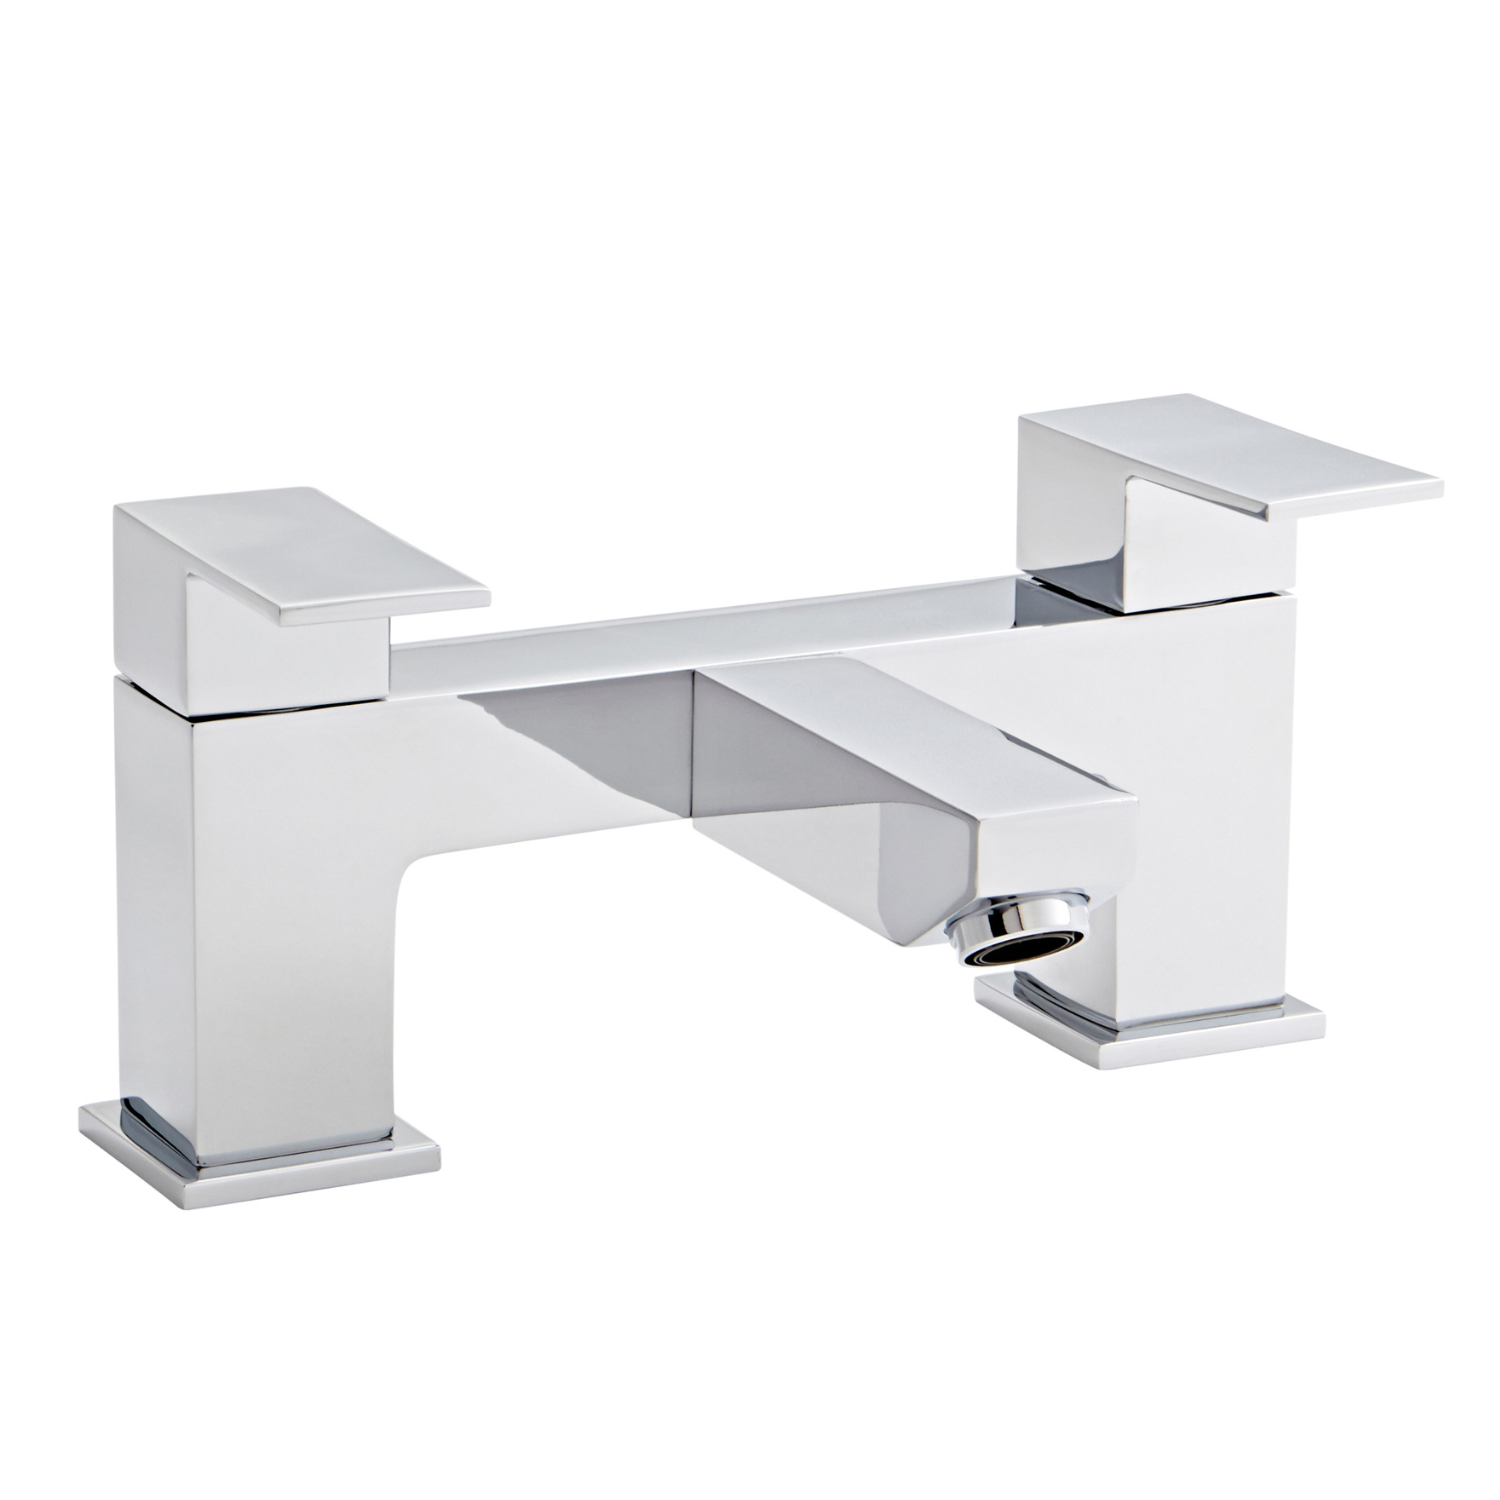 Elevate Your Bath Experience with Stylish Bath Taps: Element Bath Shower Mixer Taps from B&Q